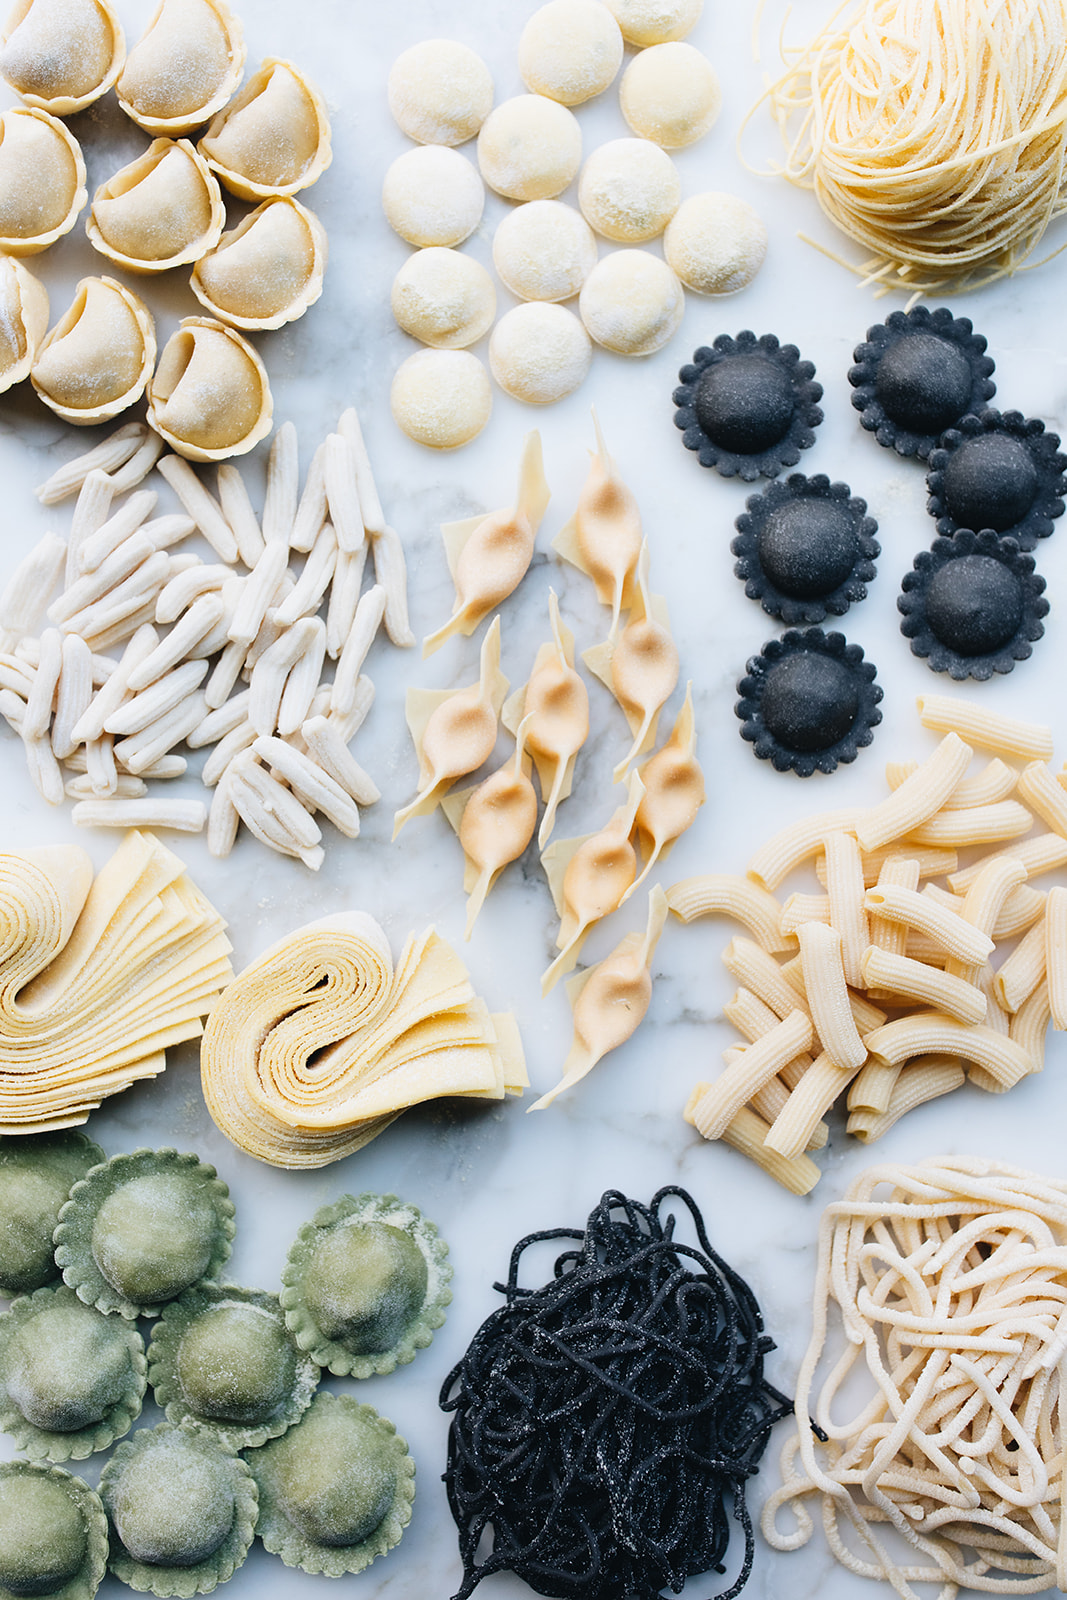 A variety of colorful pastas